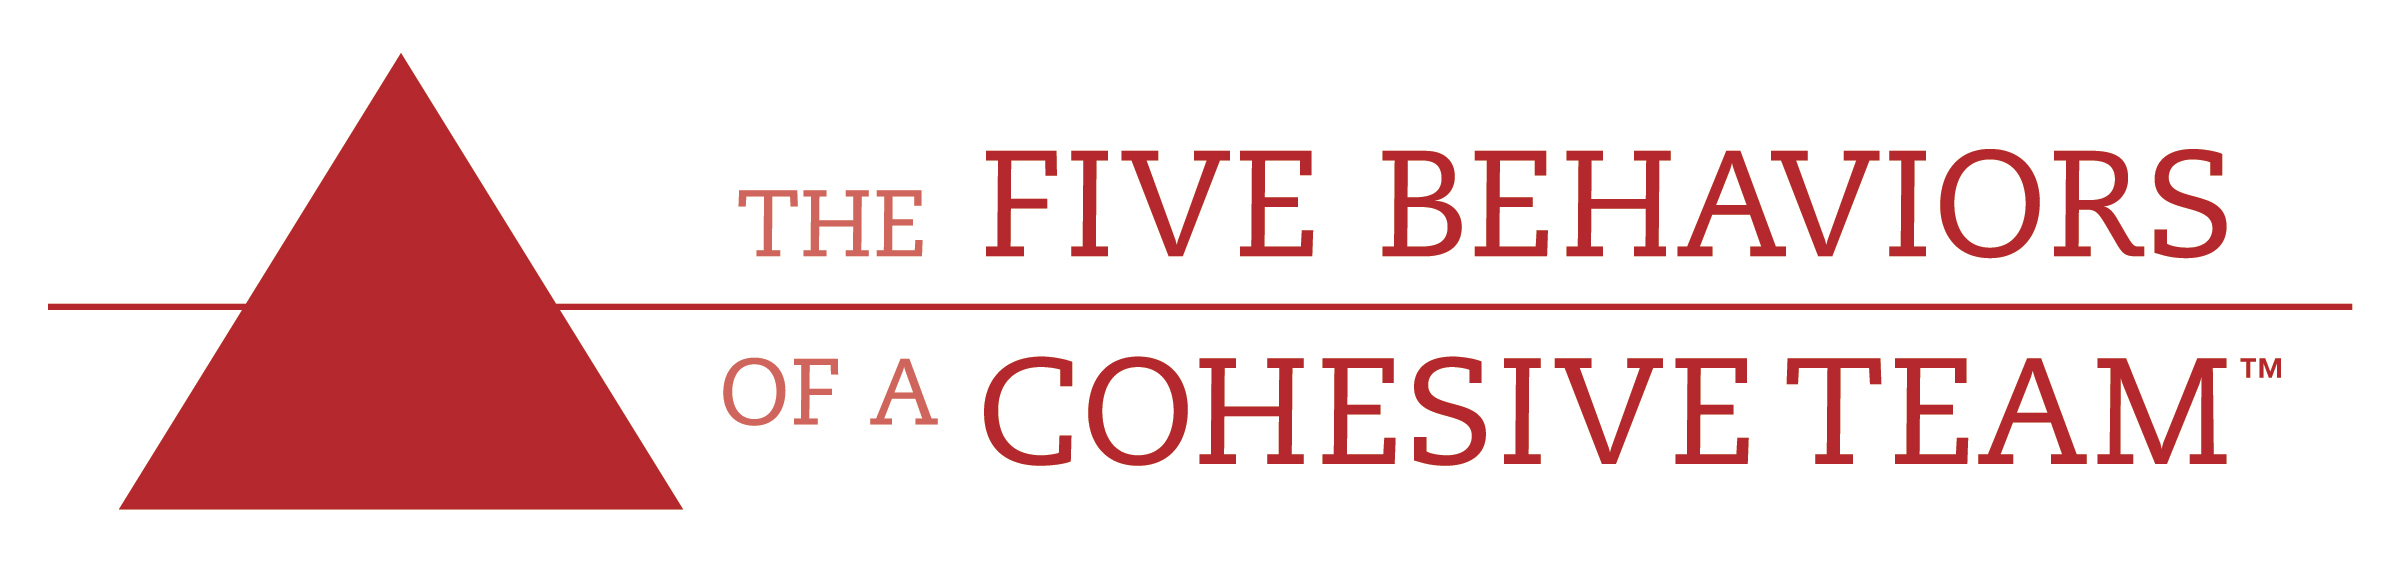 Wiley's 5 Behaviors of a Cohesive Team